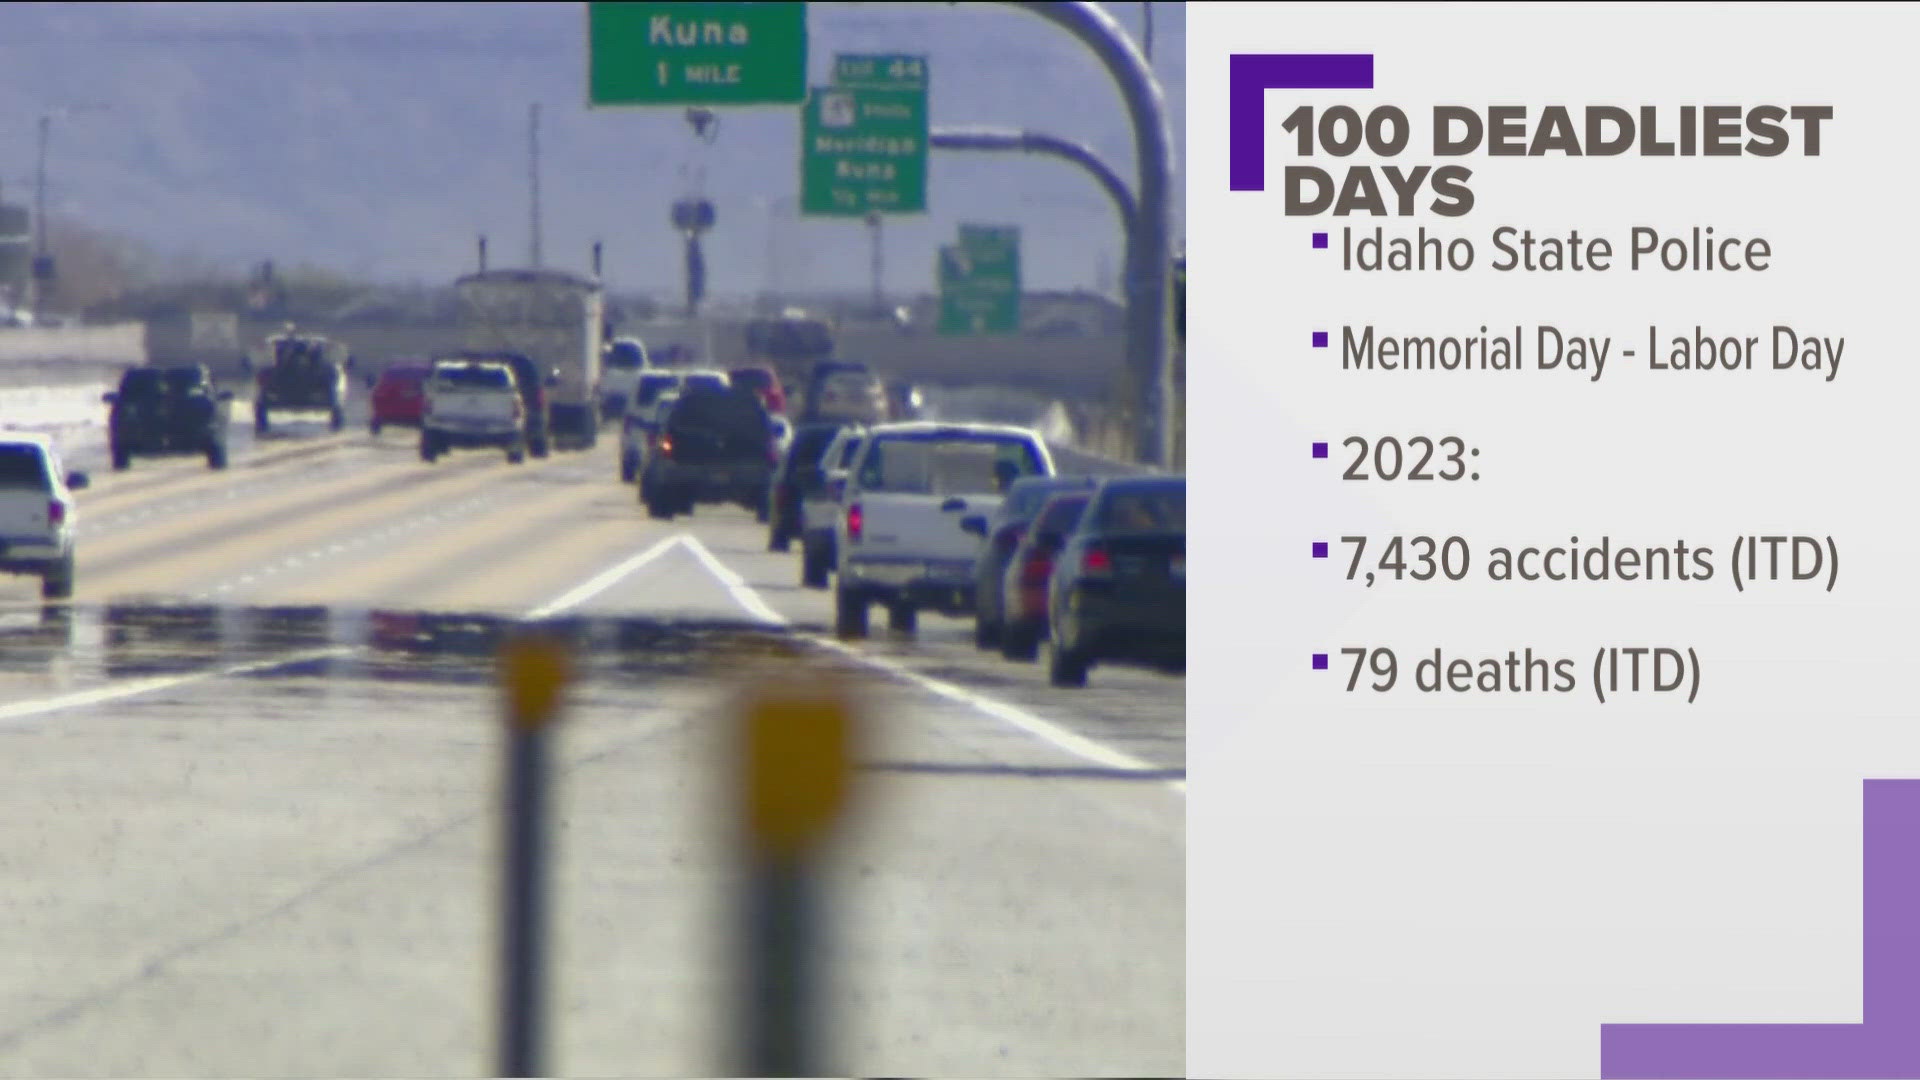 The Idaho Transportation Department reported 7,430 crashes resulting in 79 deaths on Gem State roads between Memorial Day and Labor Day last year.